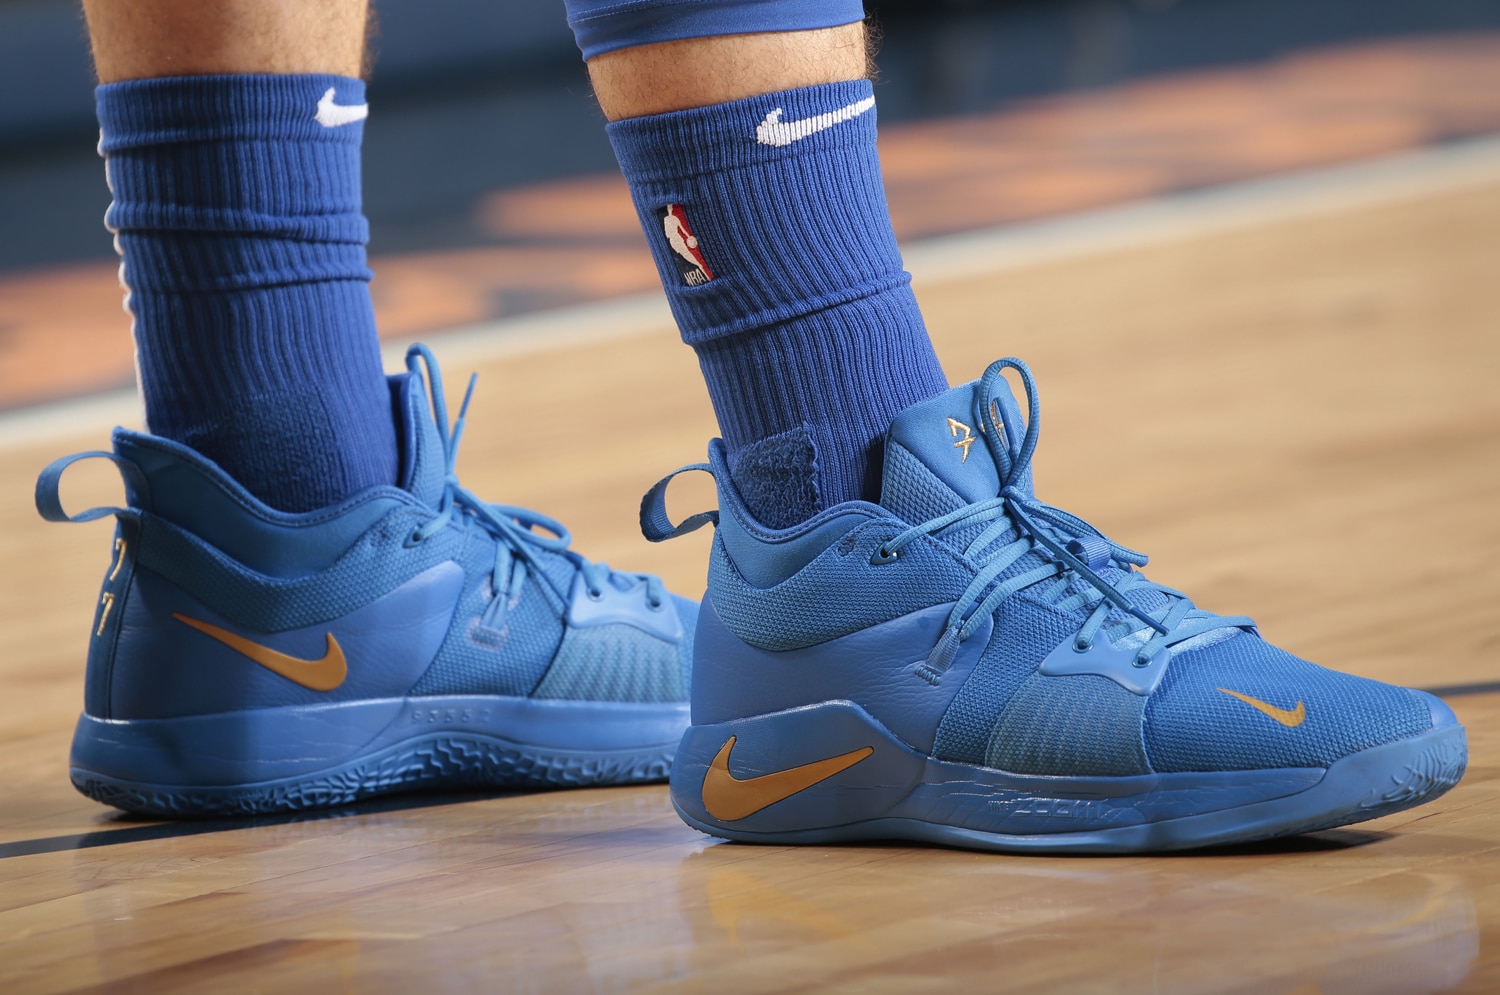 What Pros Wear: Luka Doncic Nails Quick Release Buzzer Beater in the Nike  PG 2 Shoes - What Pros Wear